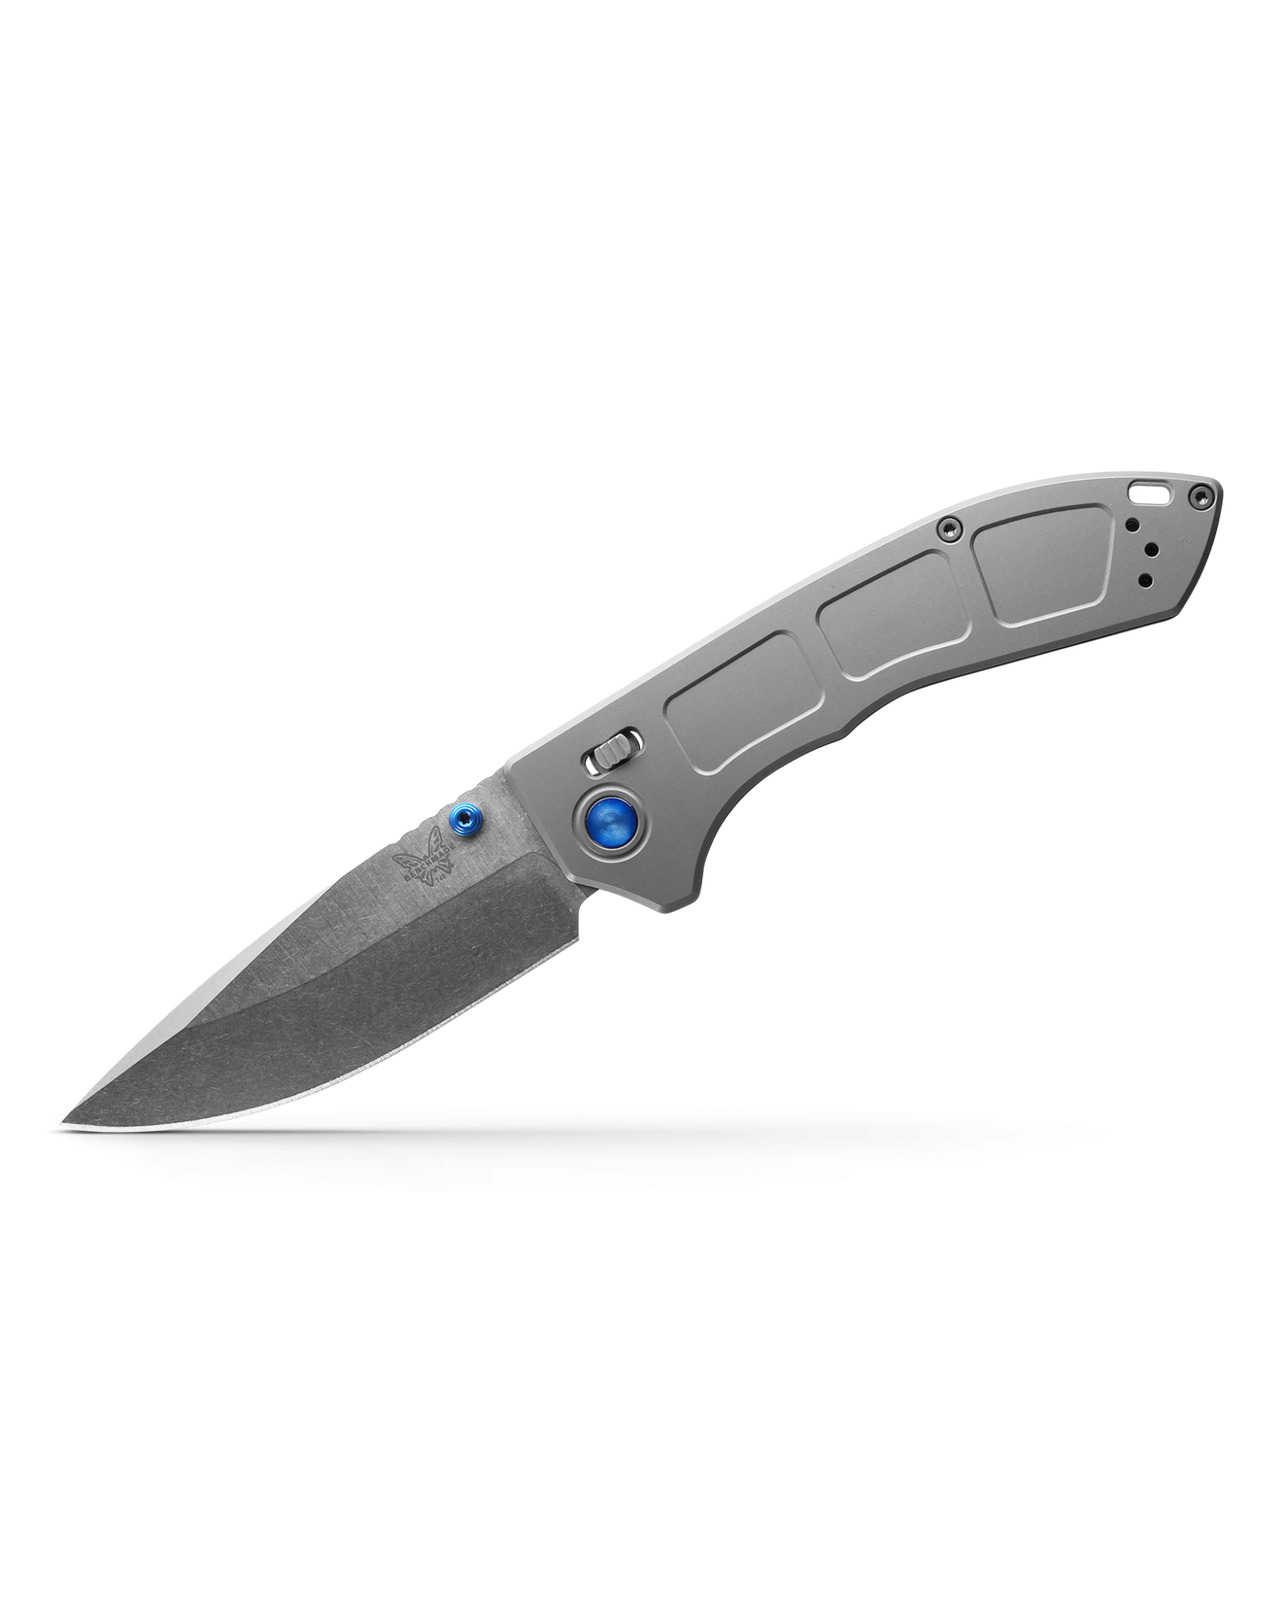 Benchmade Knives Narrows 748 M390 Stainless Titanium Pocket Knife